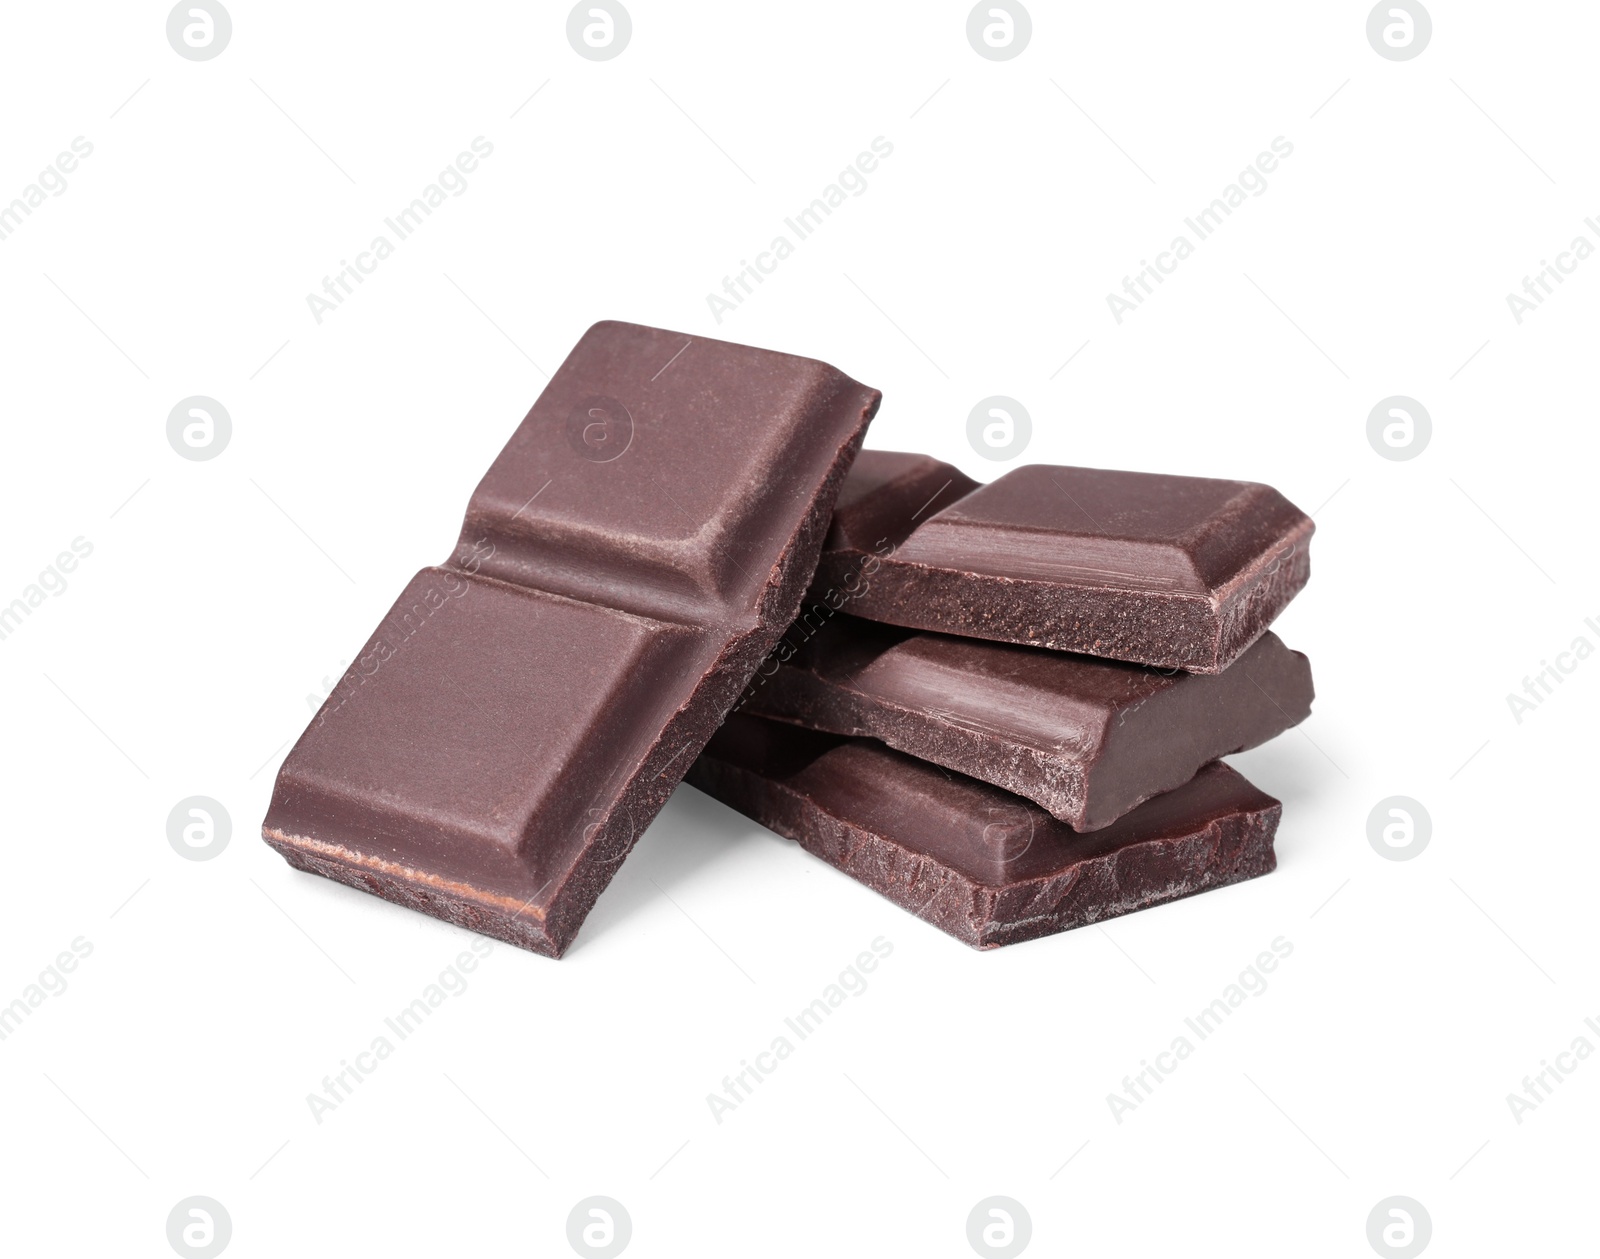 Photo of Pieces of delicious dark chocolate bar on white background